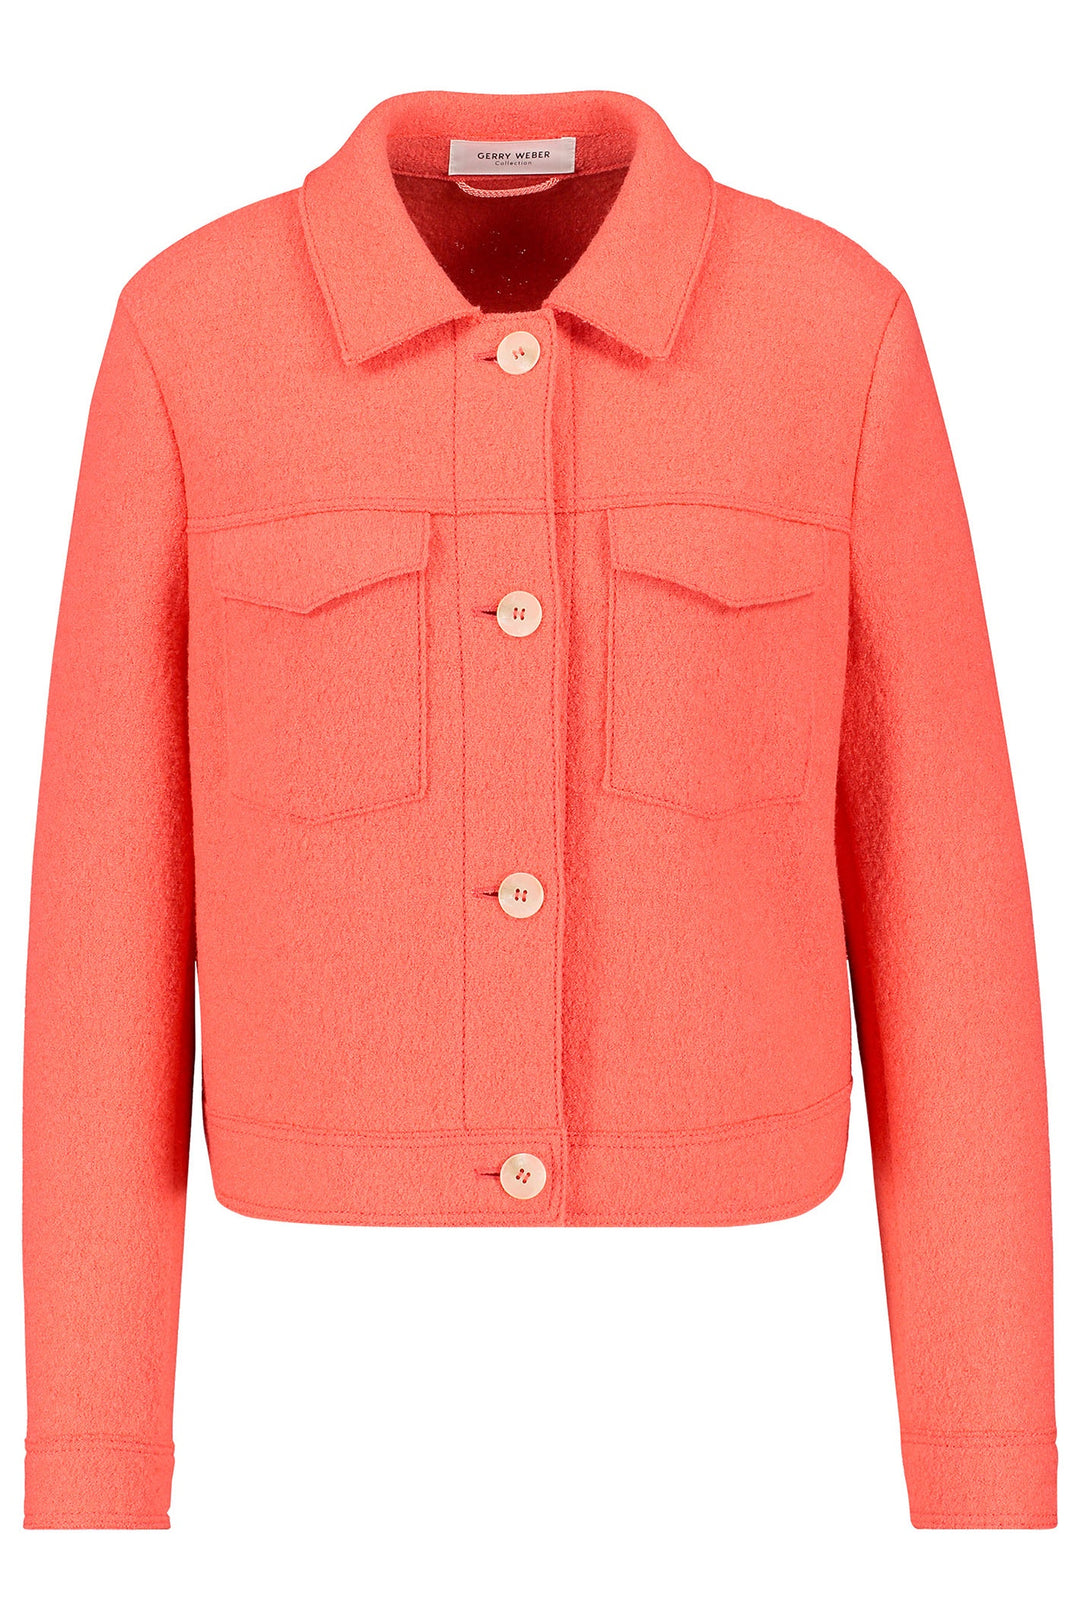 Gerry Weber 330007-31201 Coral Boiled Wool Style Jacket - Dotique Chesterfield